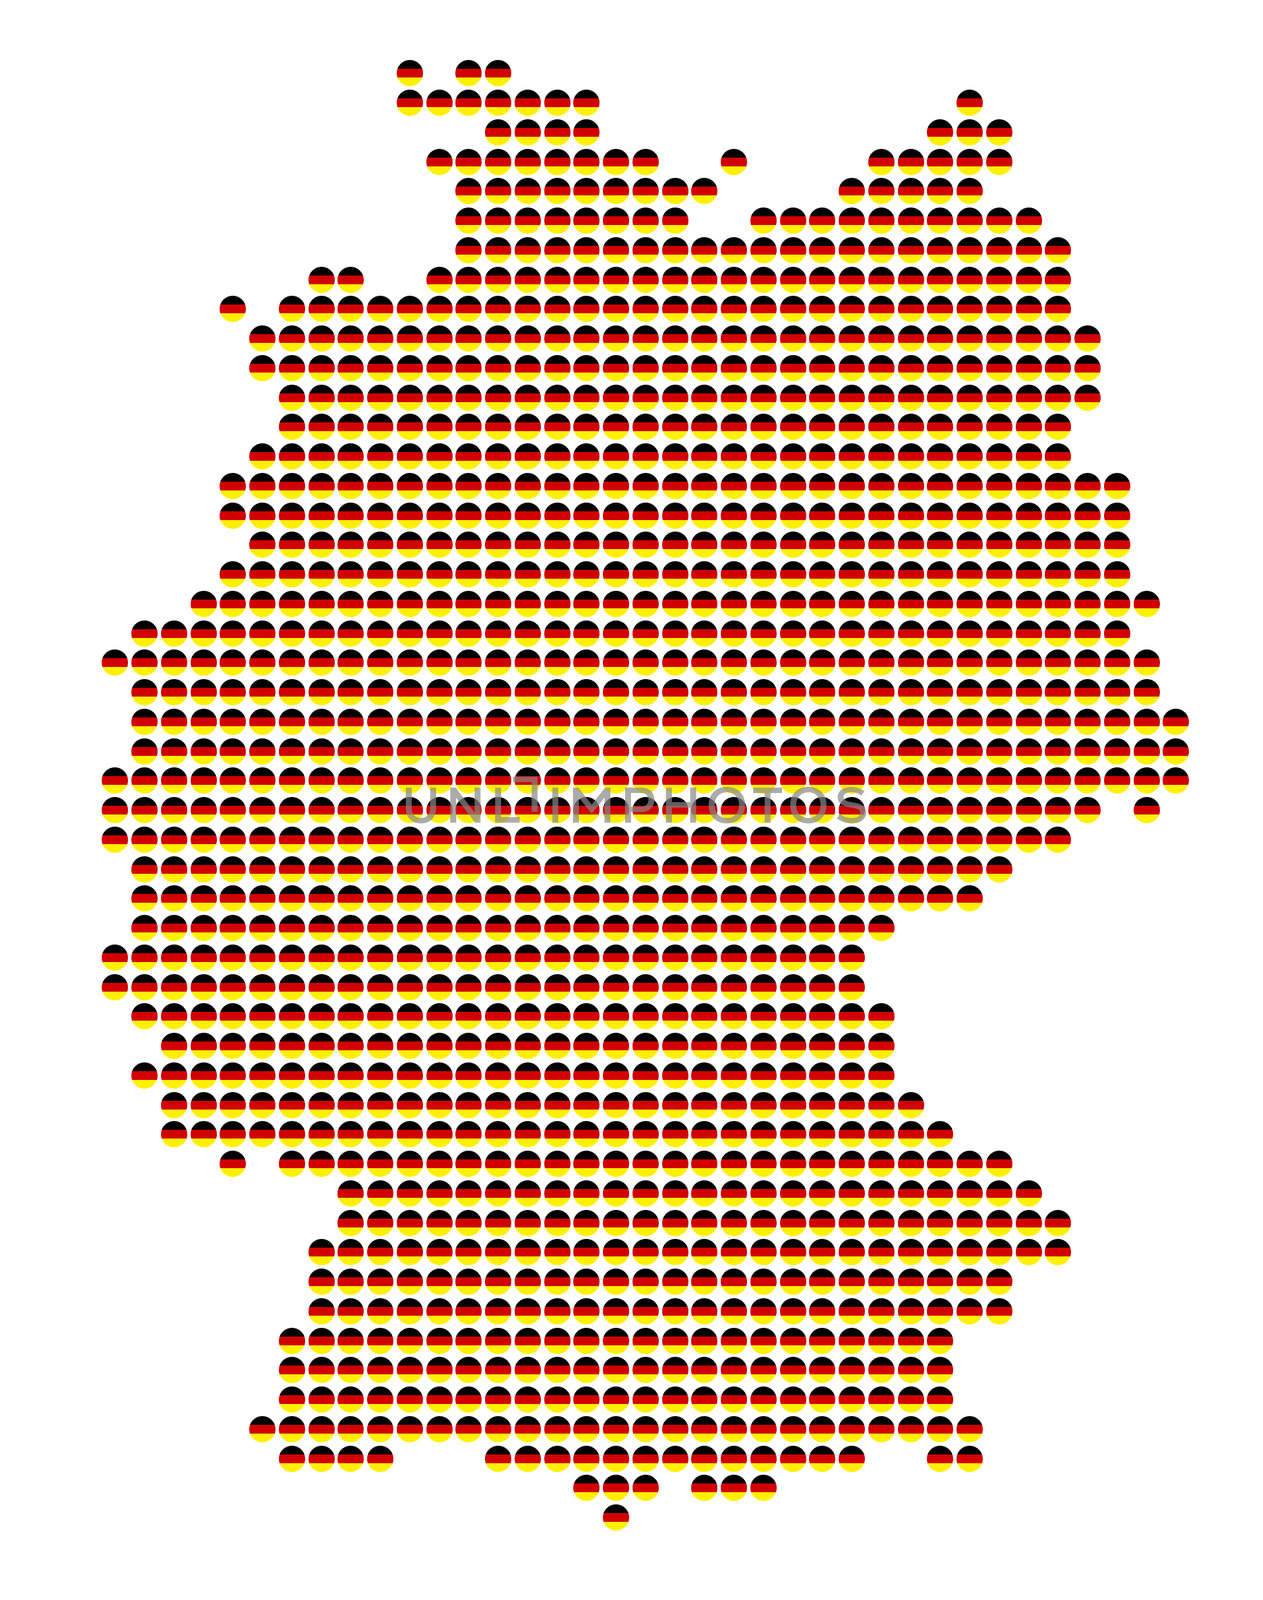 Map of Germany with dots of national flag